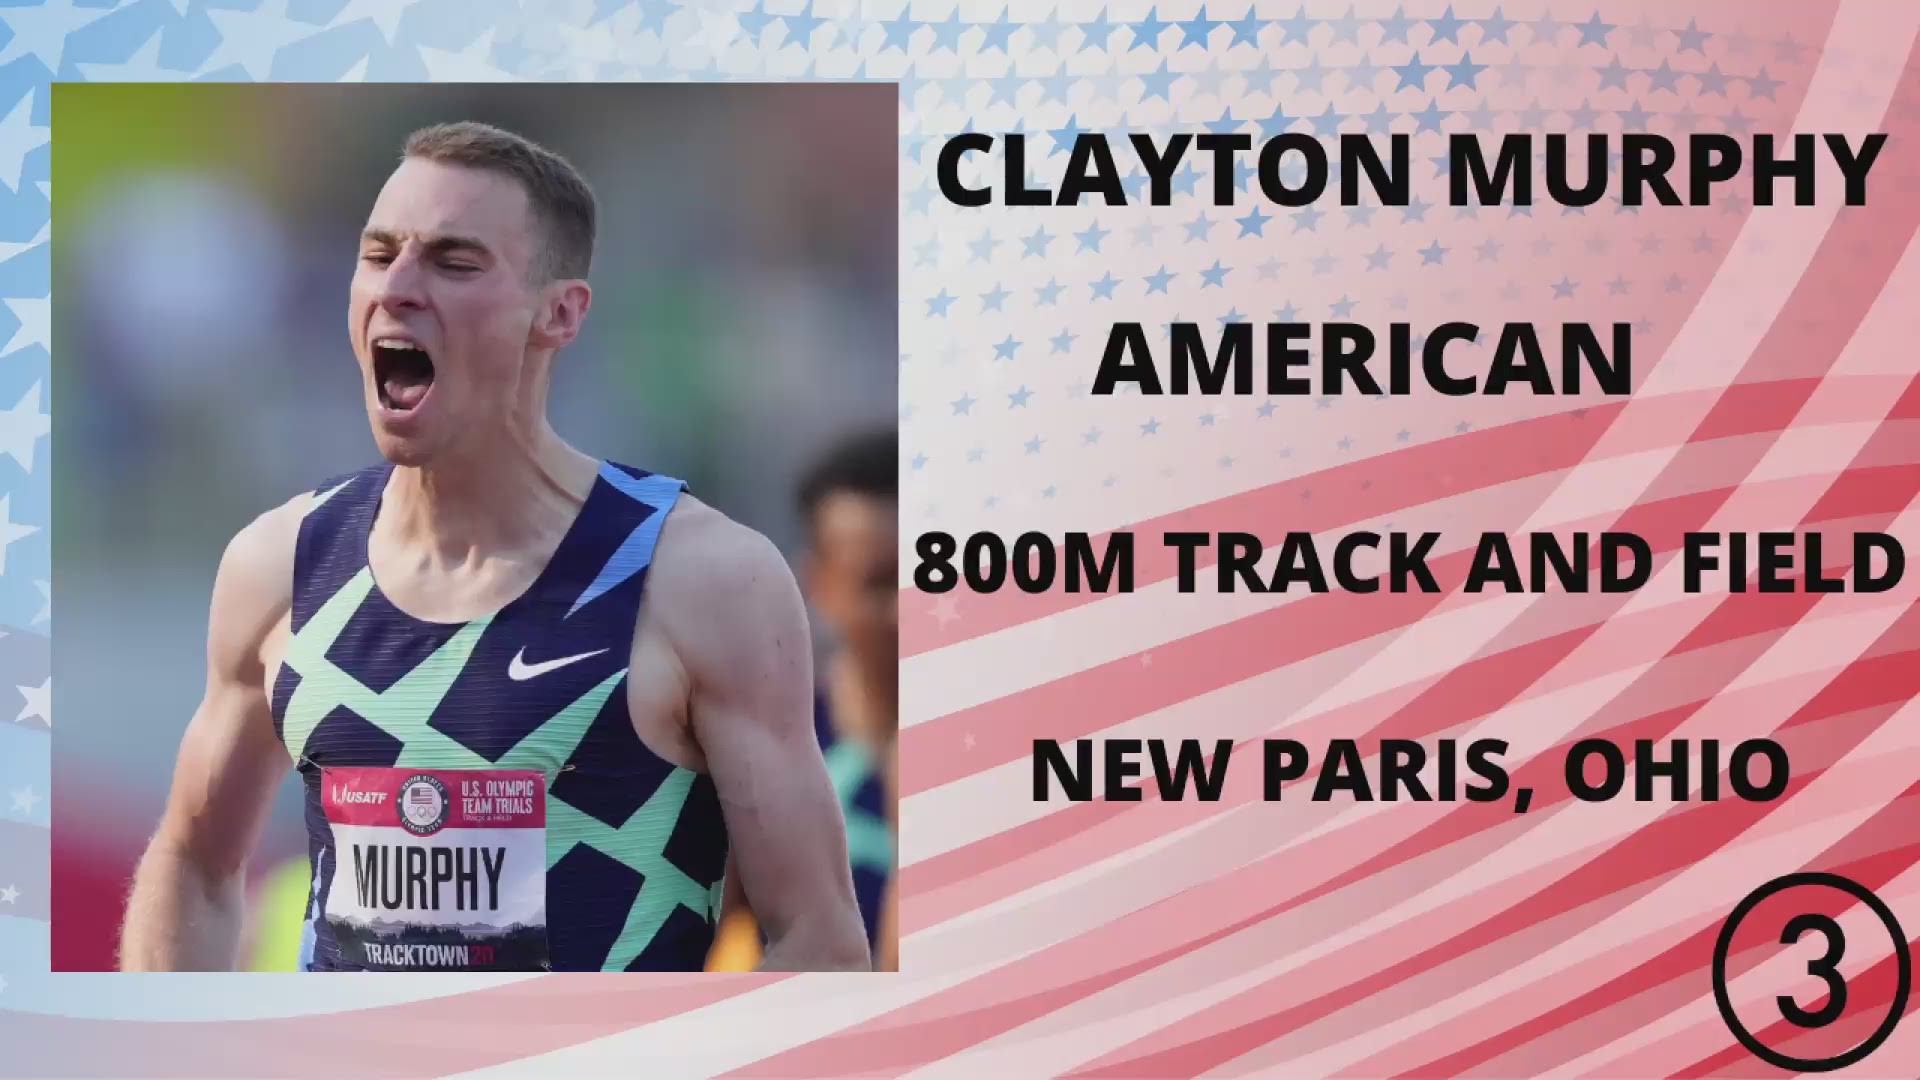 At Akron, Murphy won the 2016 NCAA outdoor 1,500-meter title and the 800-meter indoor title. He won bronze in the 800-meter race in the 2016 Olympics in Rio.